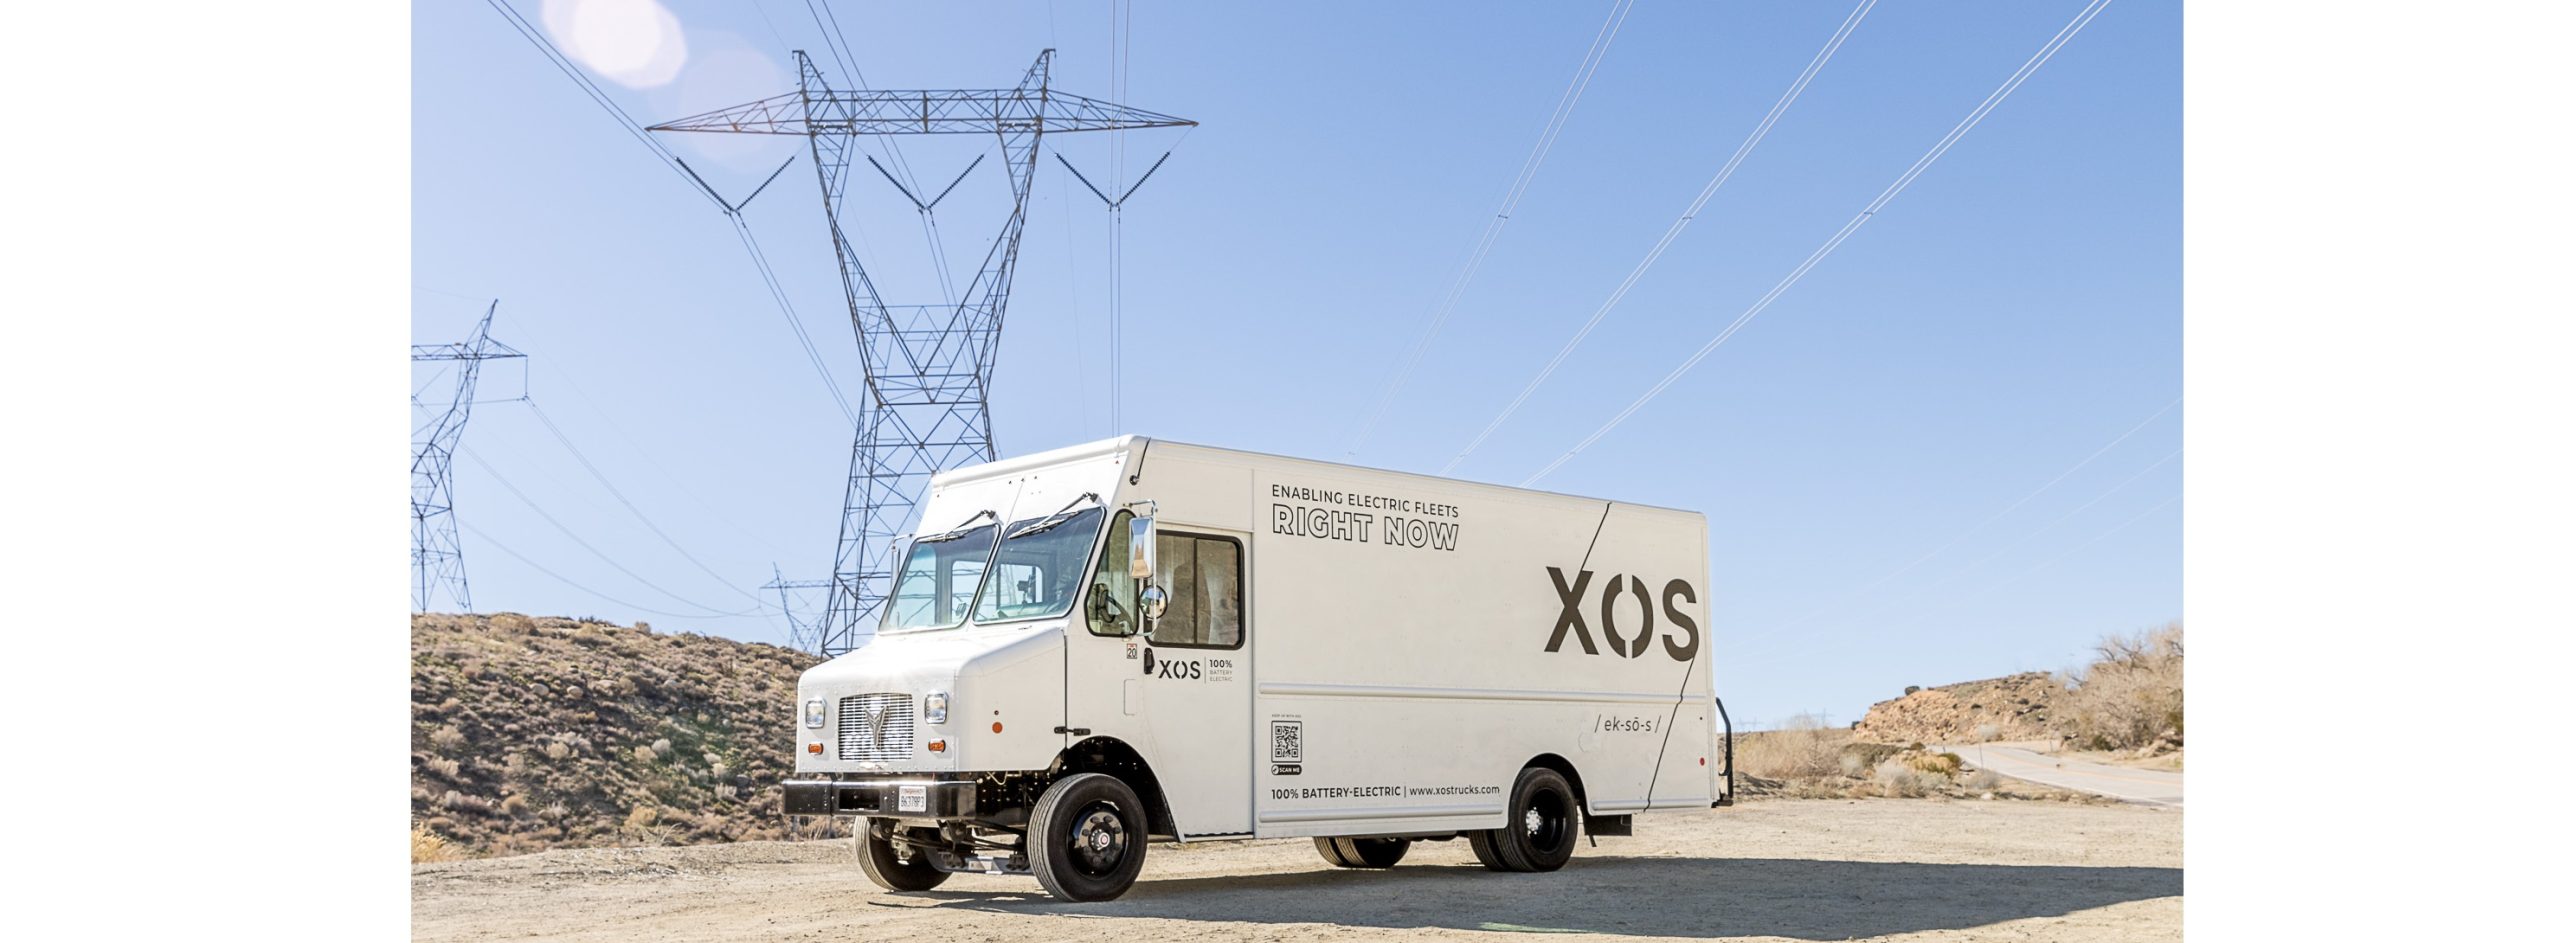 Sibros teams up with Xos trucks for electric fleet connectivity